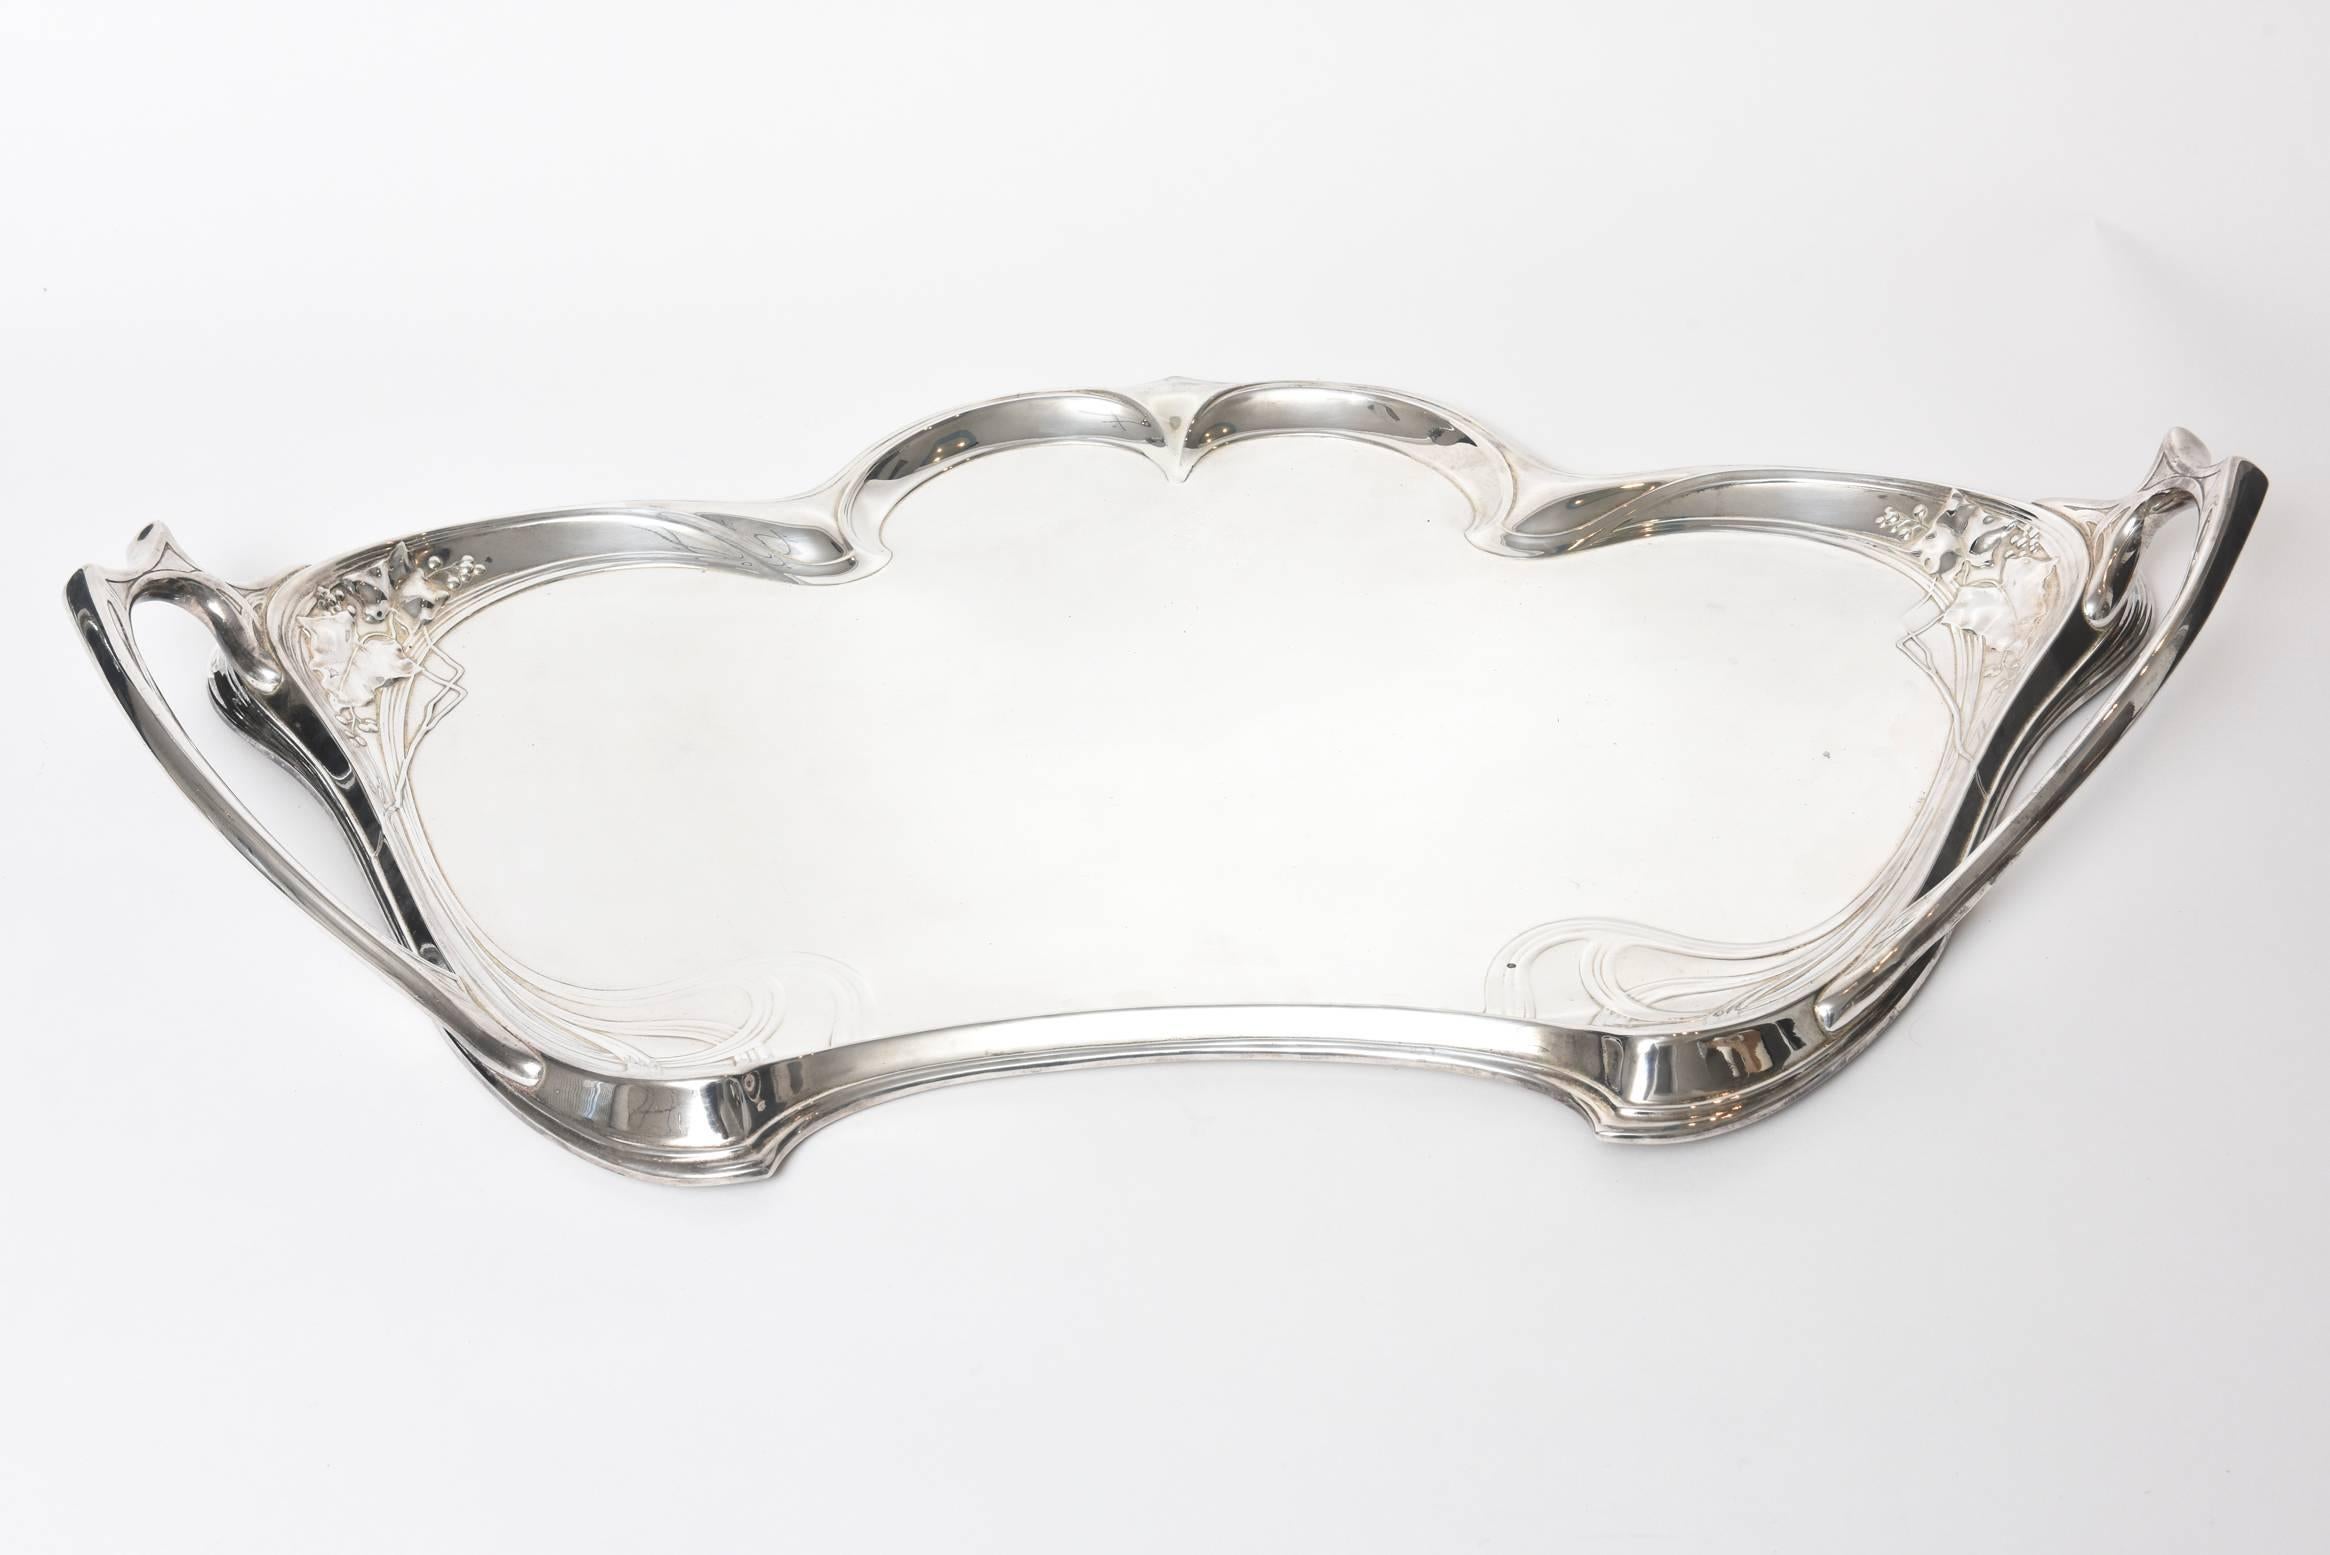 German WMF Art Nouveau silver plated handled waiter's tray with berry and ivy foliage relief with art nouveau patterns and decorative handles. This beautiful tray fits neatly into the waist of the 